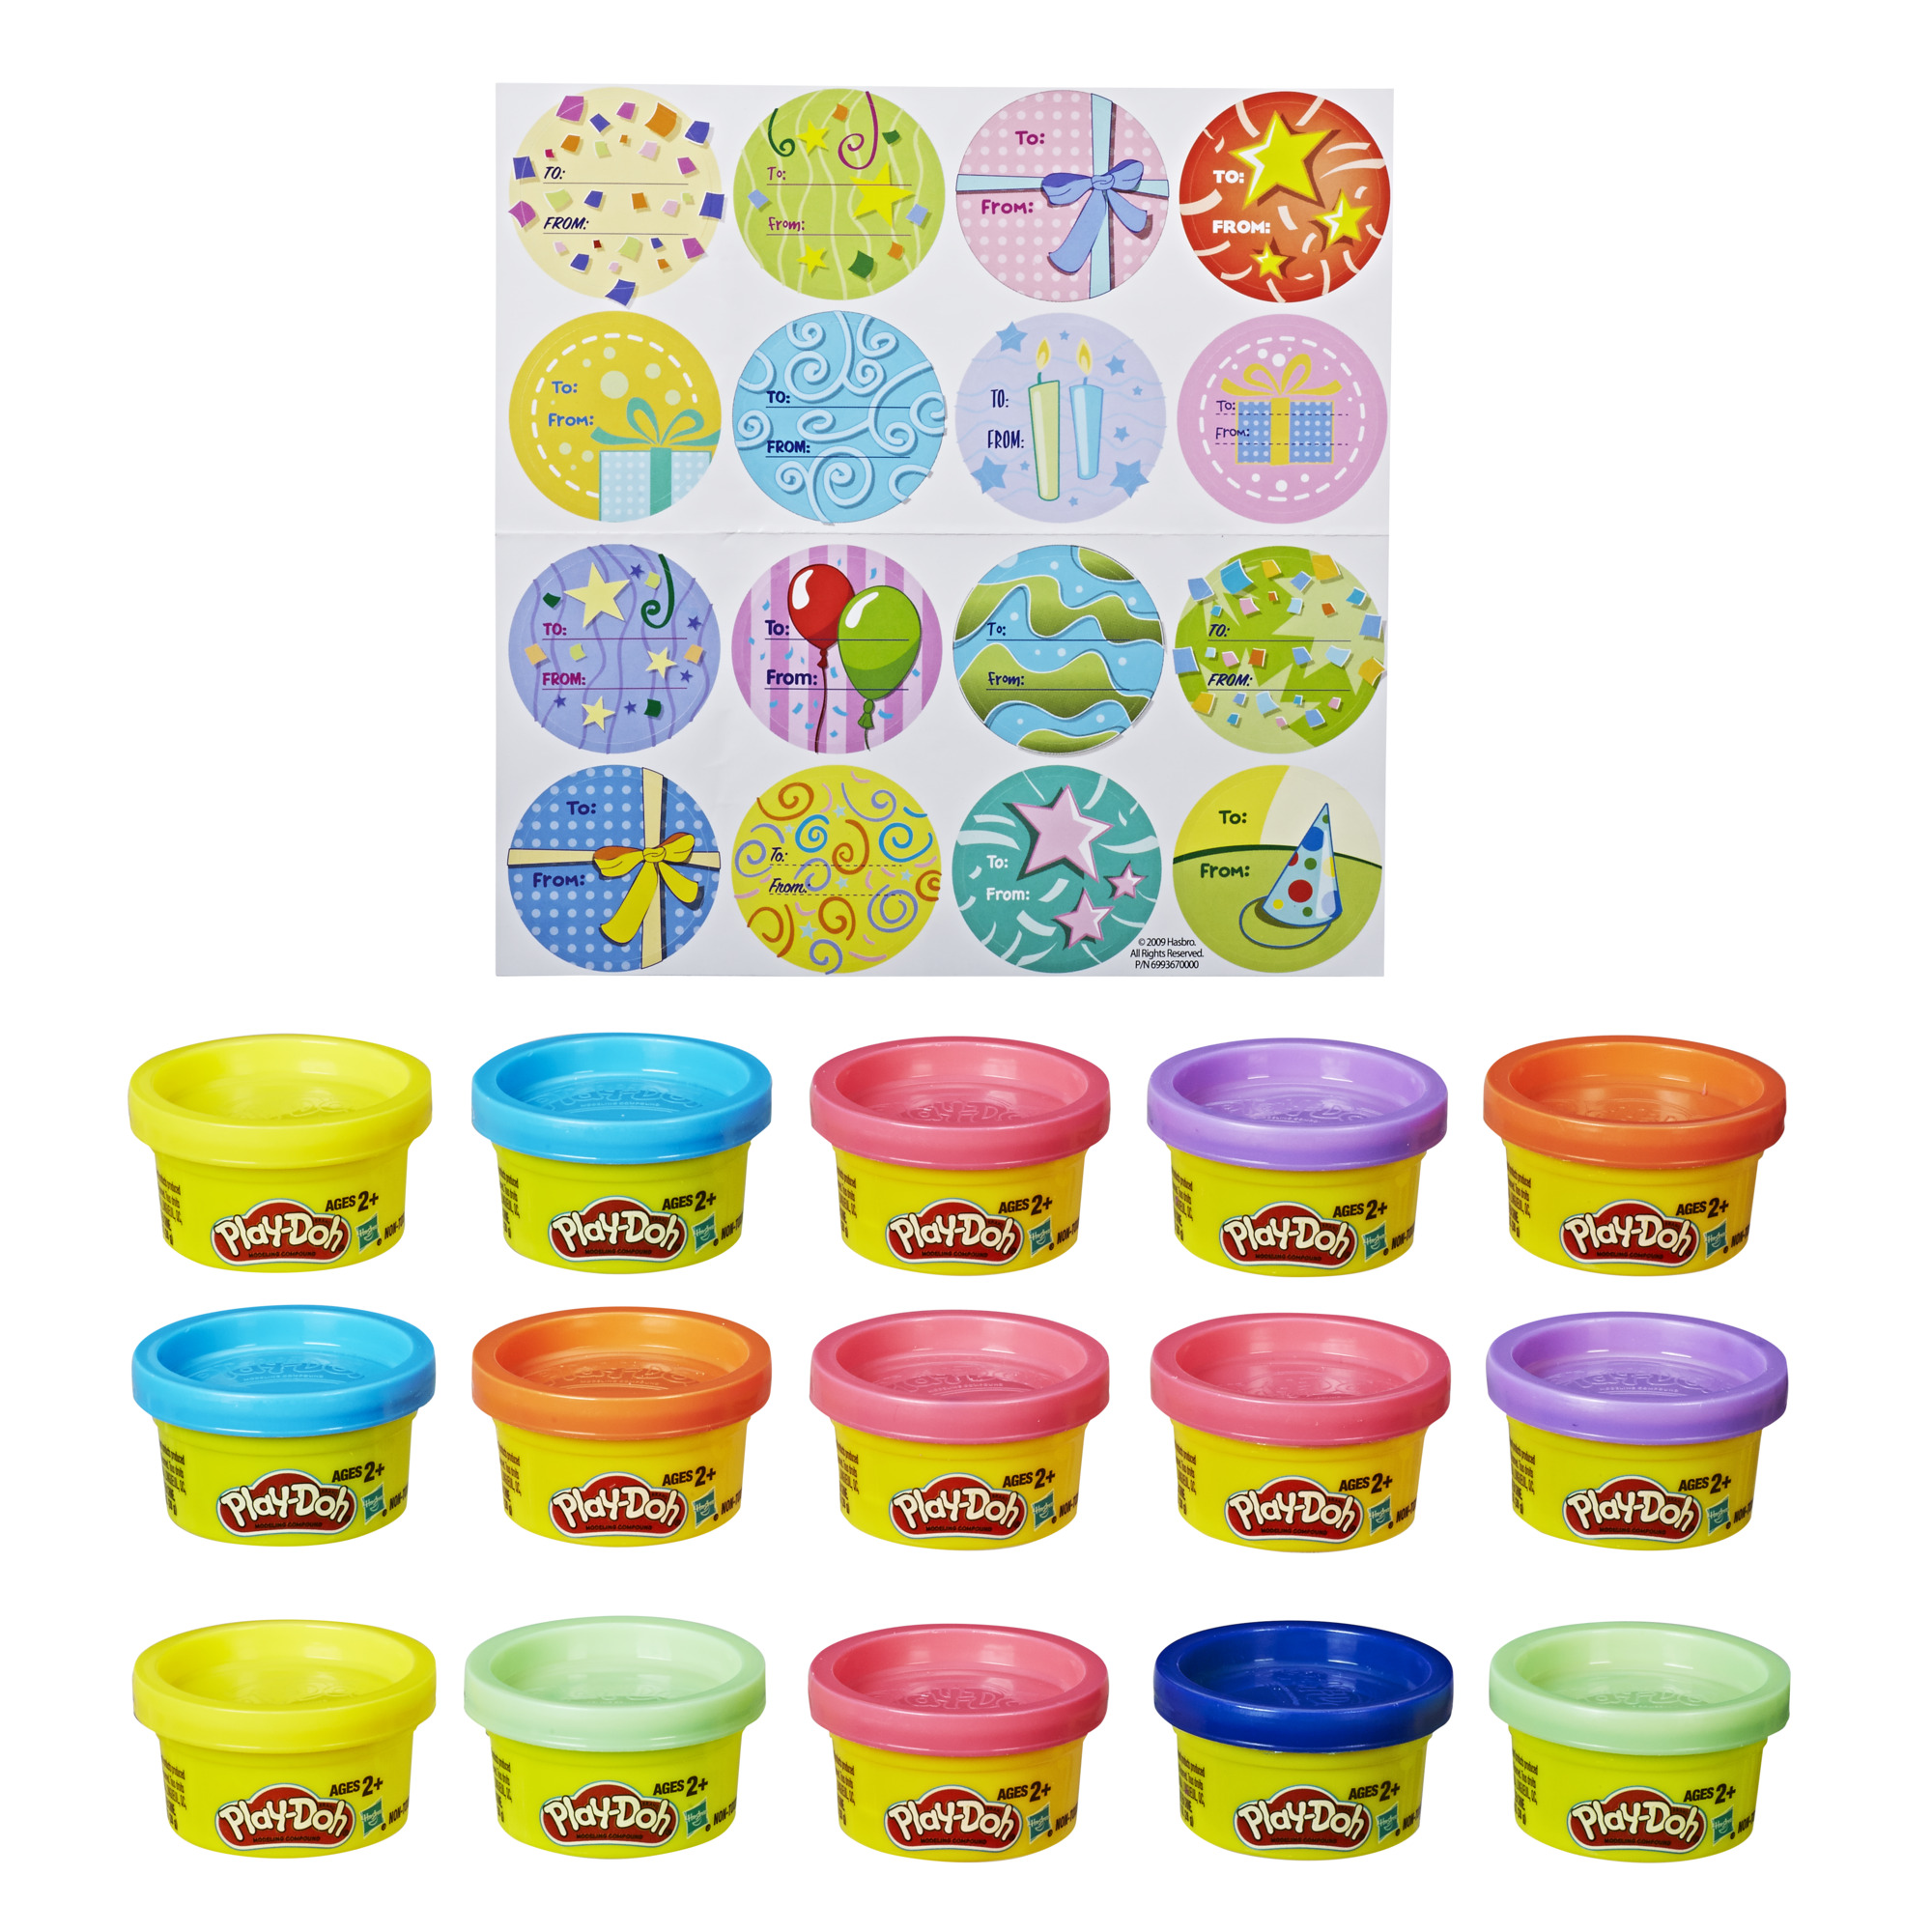 PLAY-DOH Party Bag - 15 one ounce cans of modeling compound, Easter Basket Stuffers, Egg Fillers - image 1 of 6